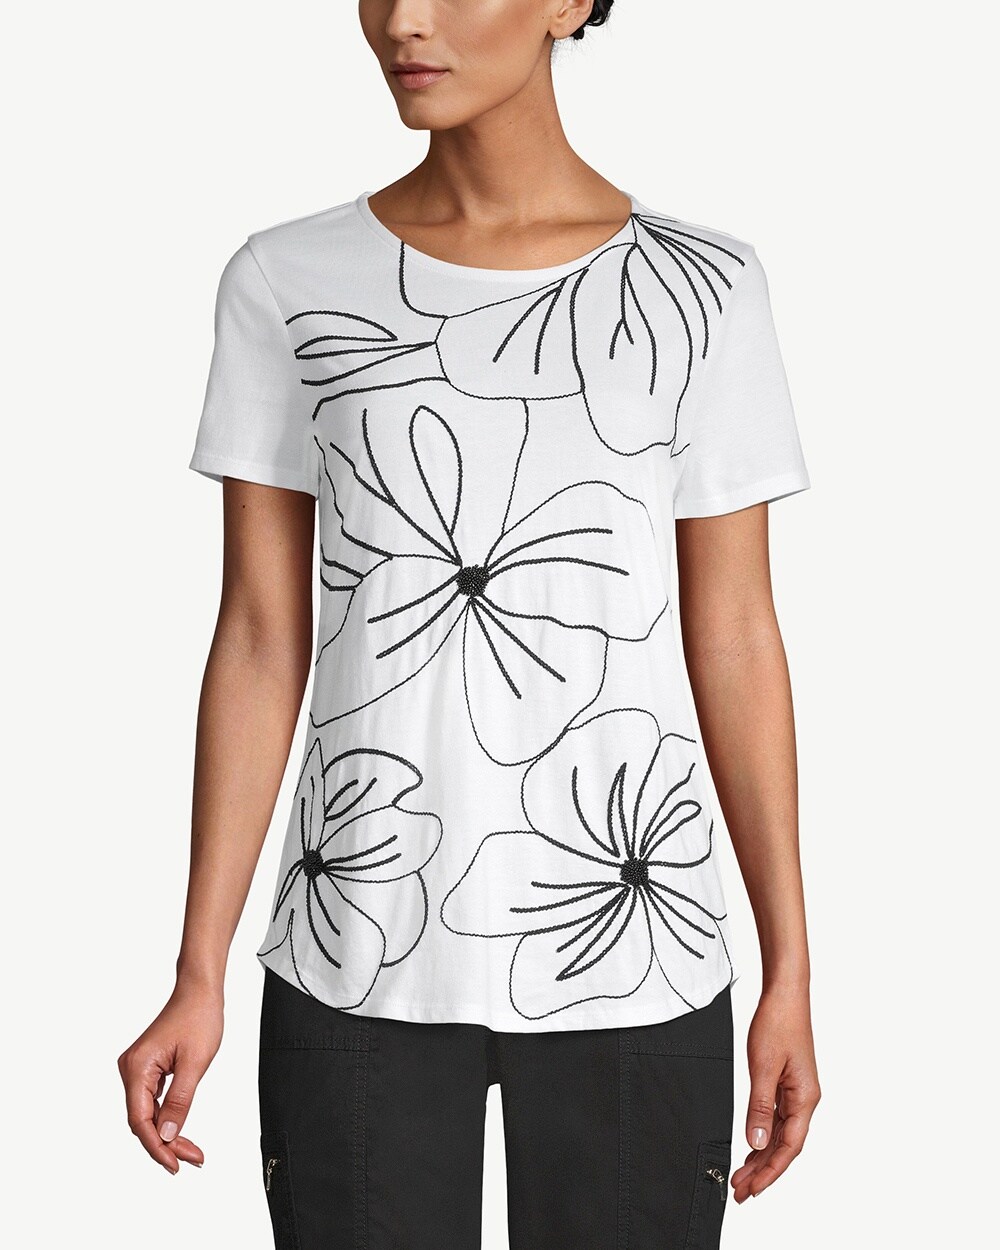 Embellished Abstract Floral Tee